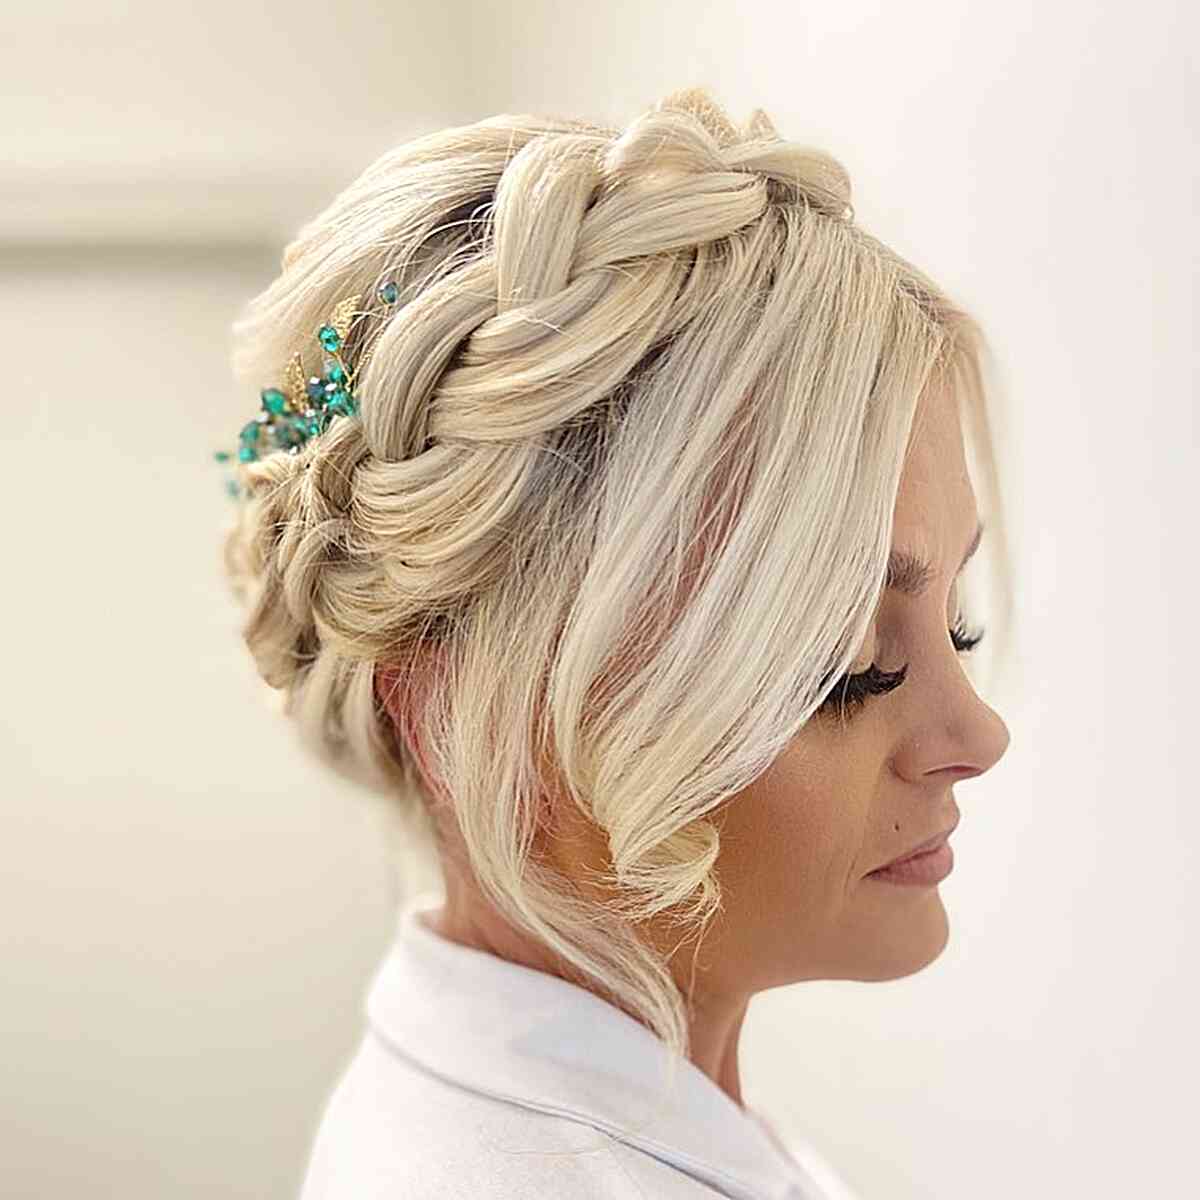 Crown Braid for Bride's Nightys Hairstyles Long Light